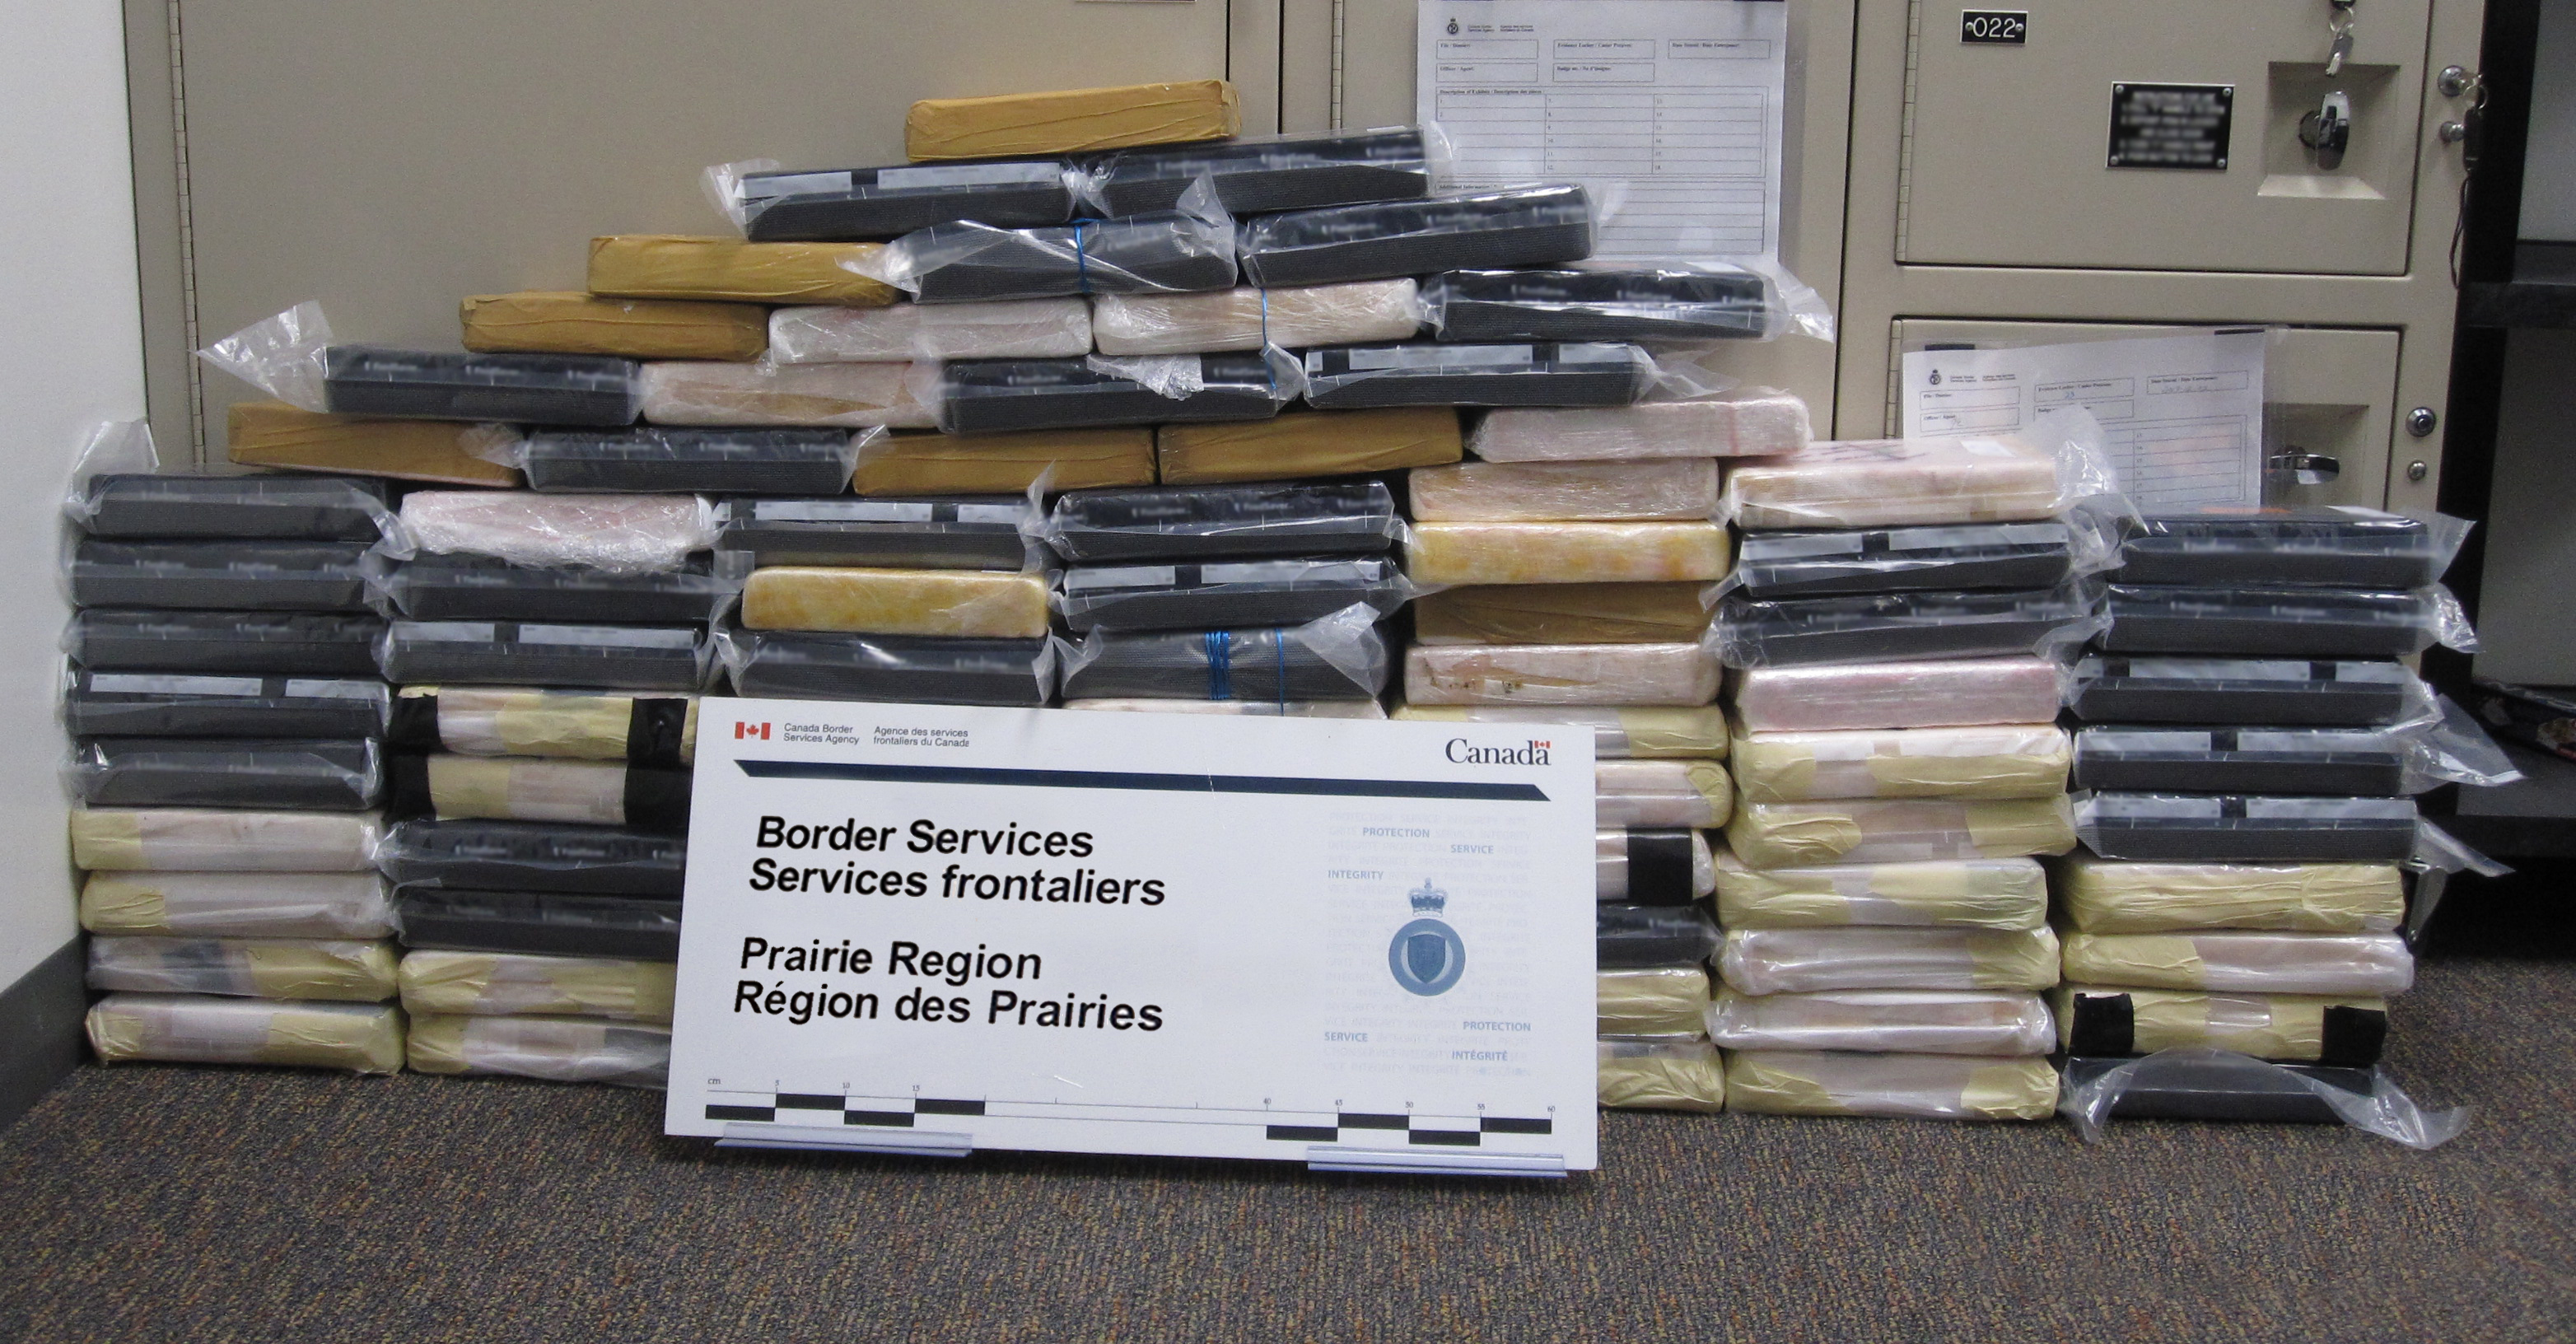 Nearly 100 kg Suspected Cocaine Seized at Coutts Border Crossing